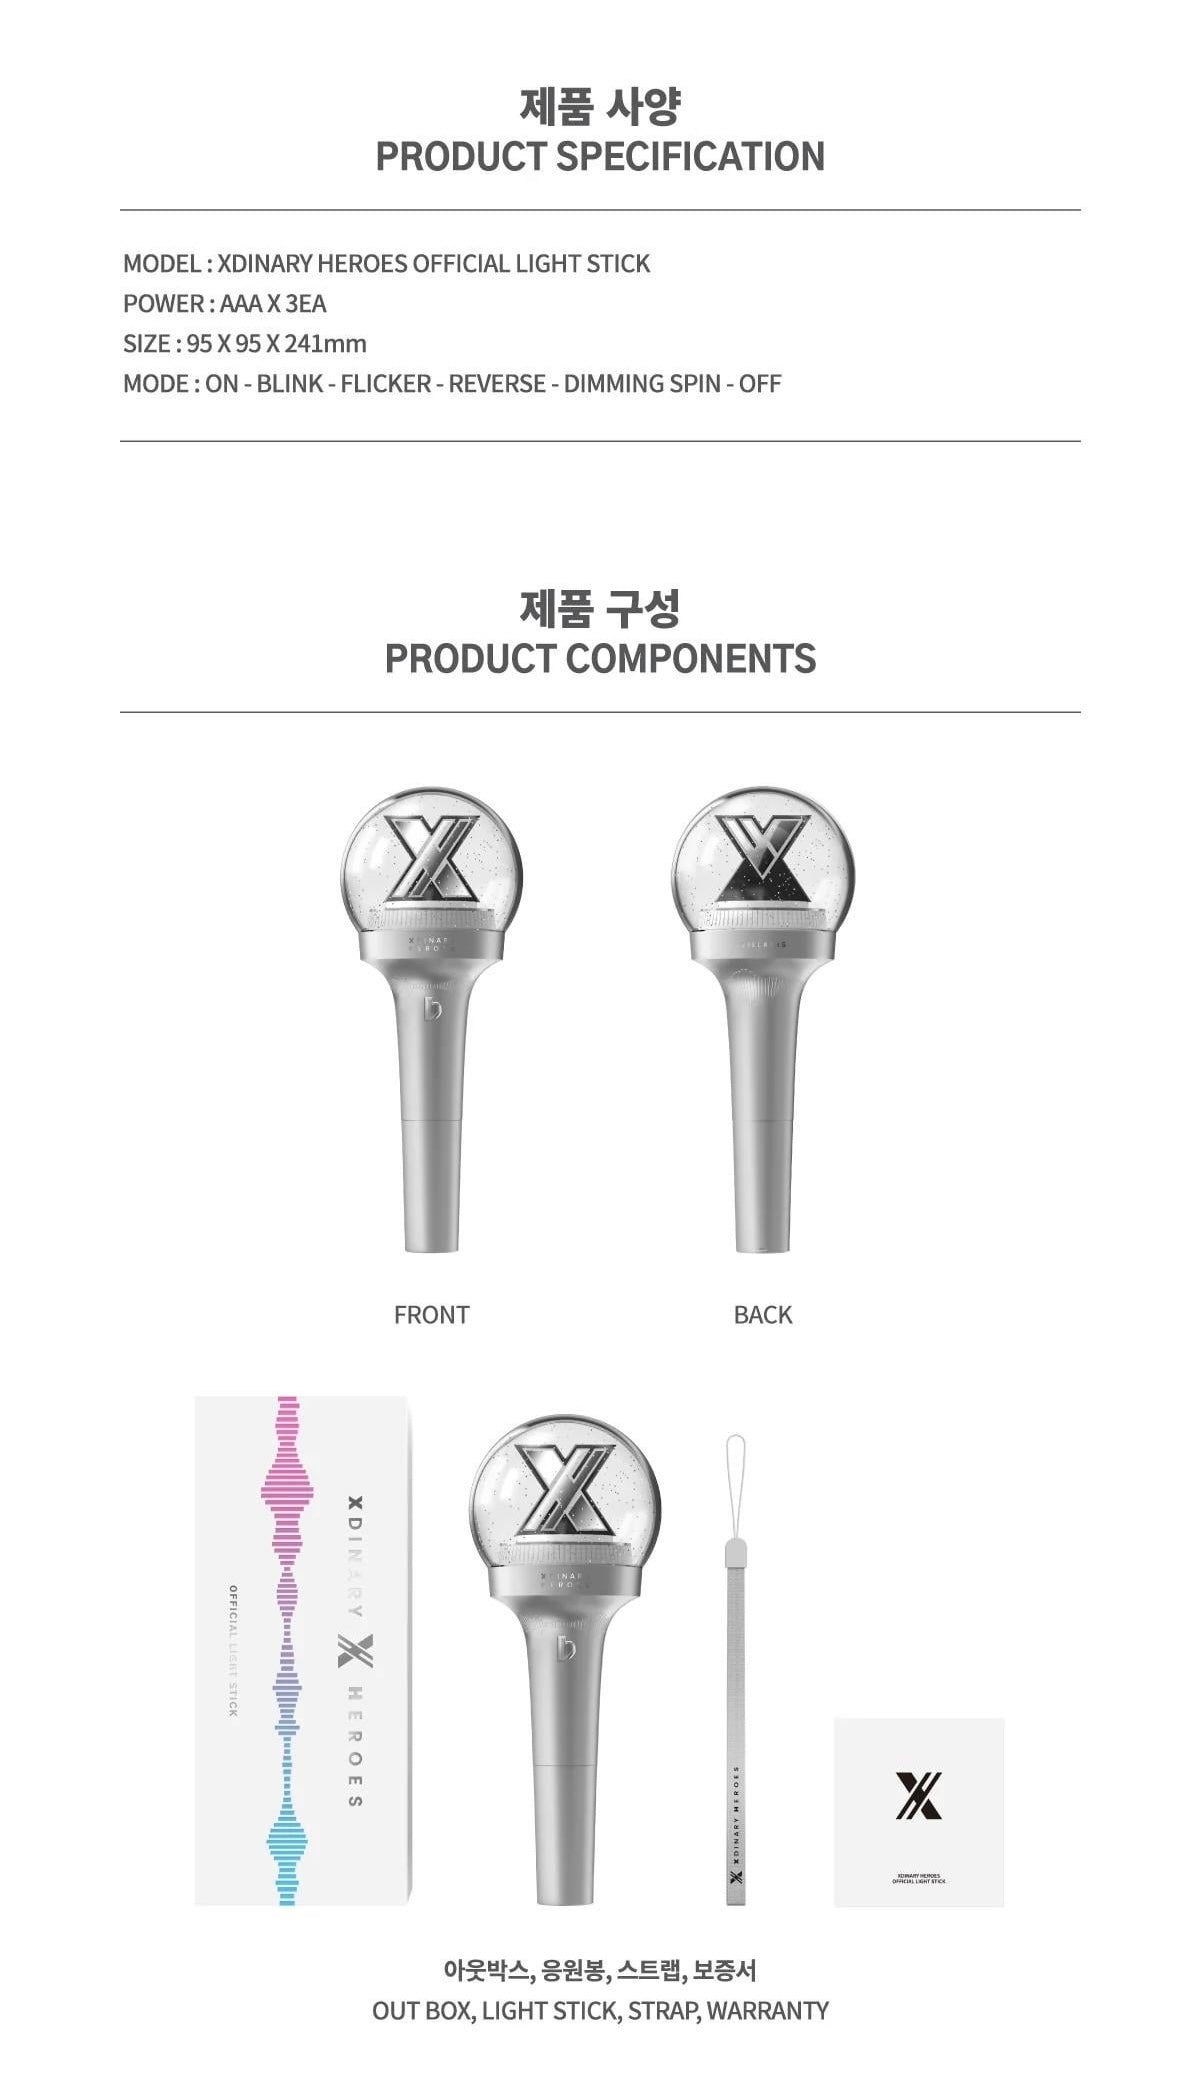 Xdinary Heroes • Official Lightstick